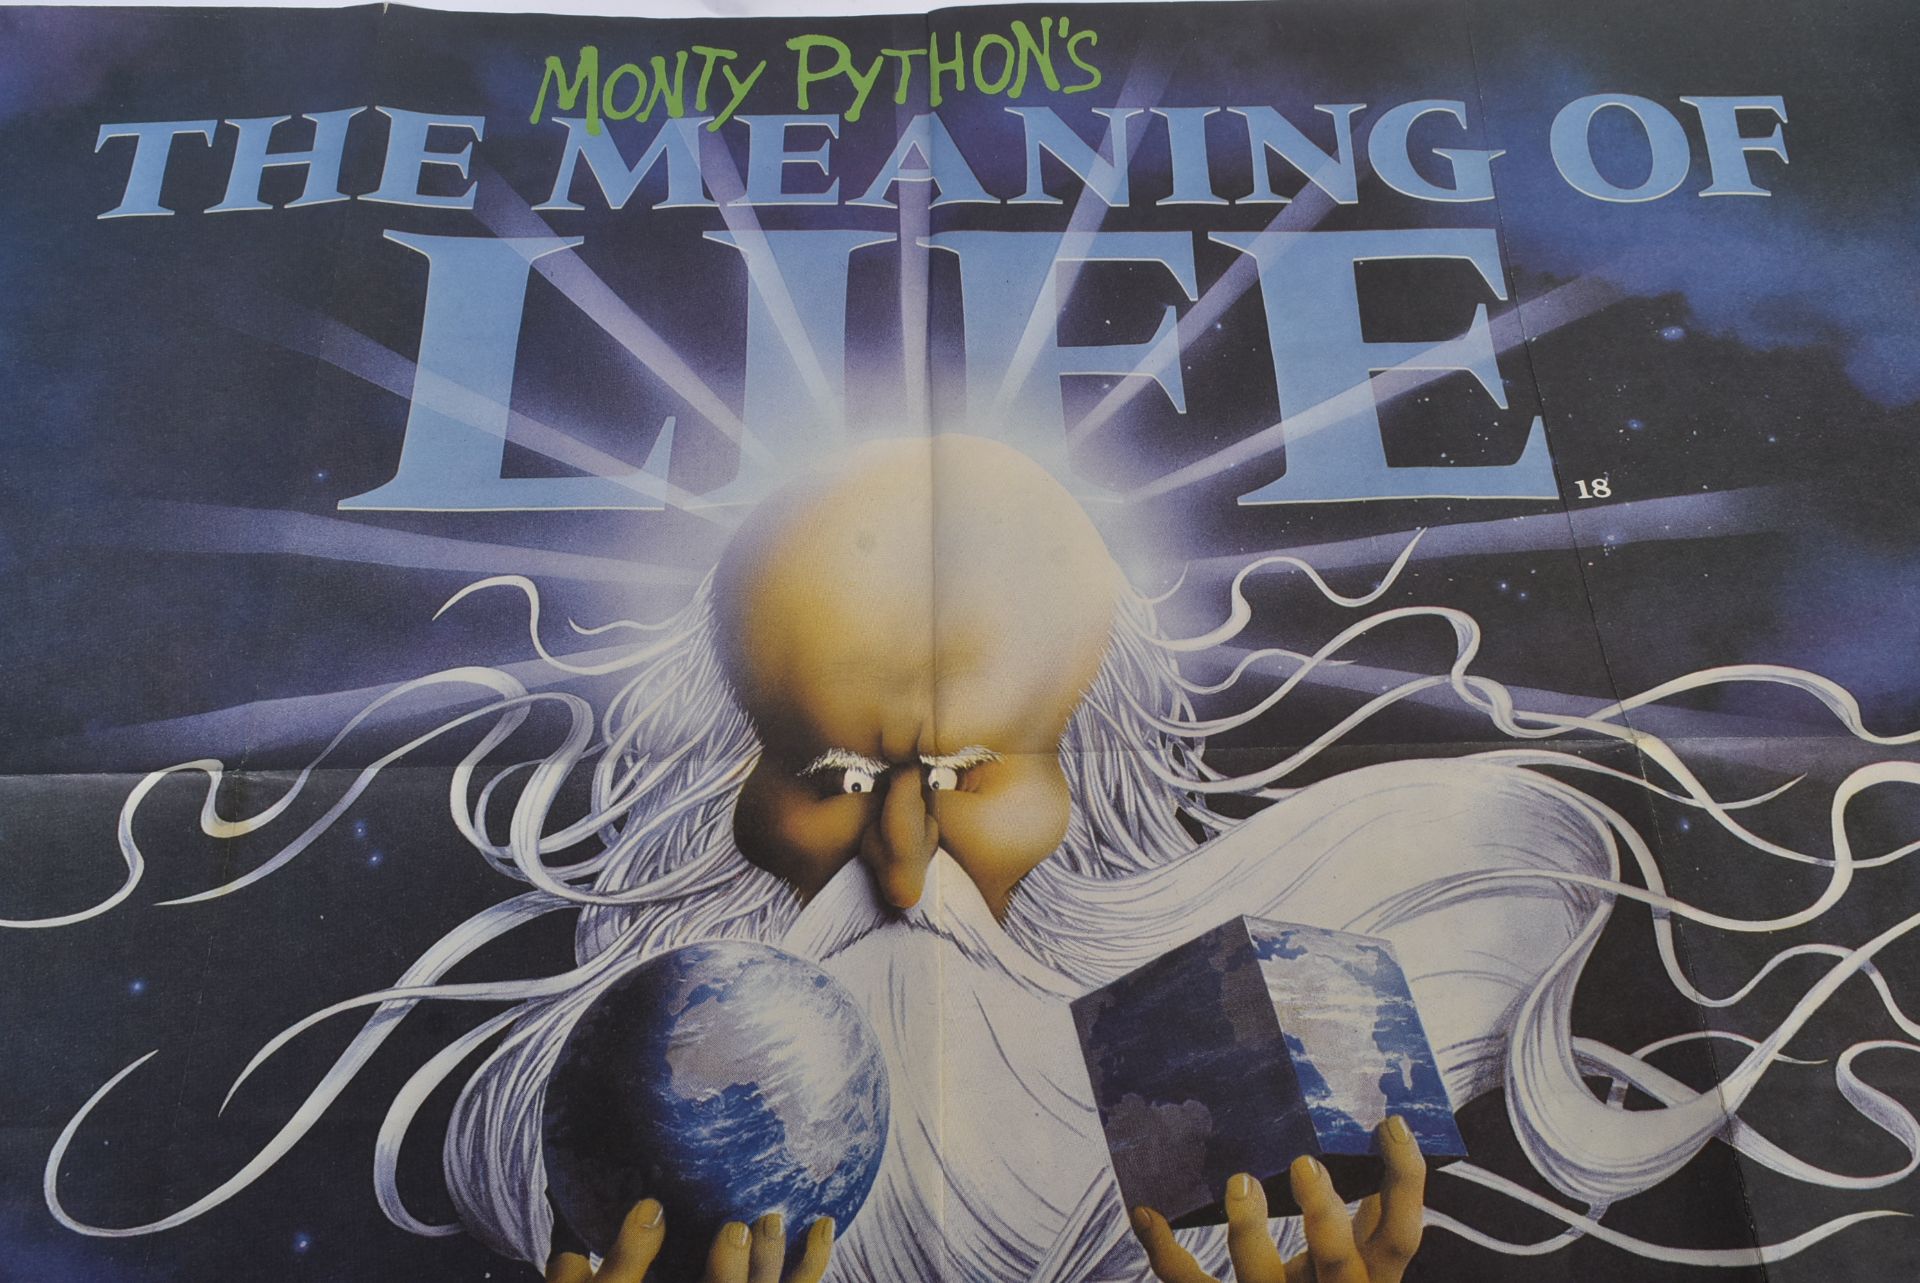 MONTY PYTHON - THE MEANING OF LIFE (1983) - SIGNED QUAD POSTER - Image 4 of 4